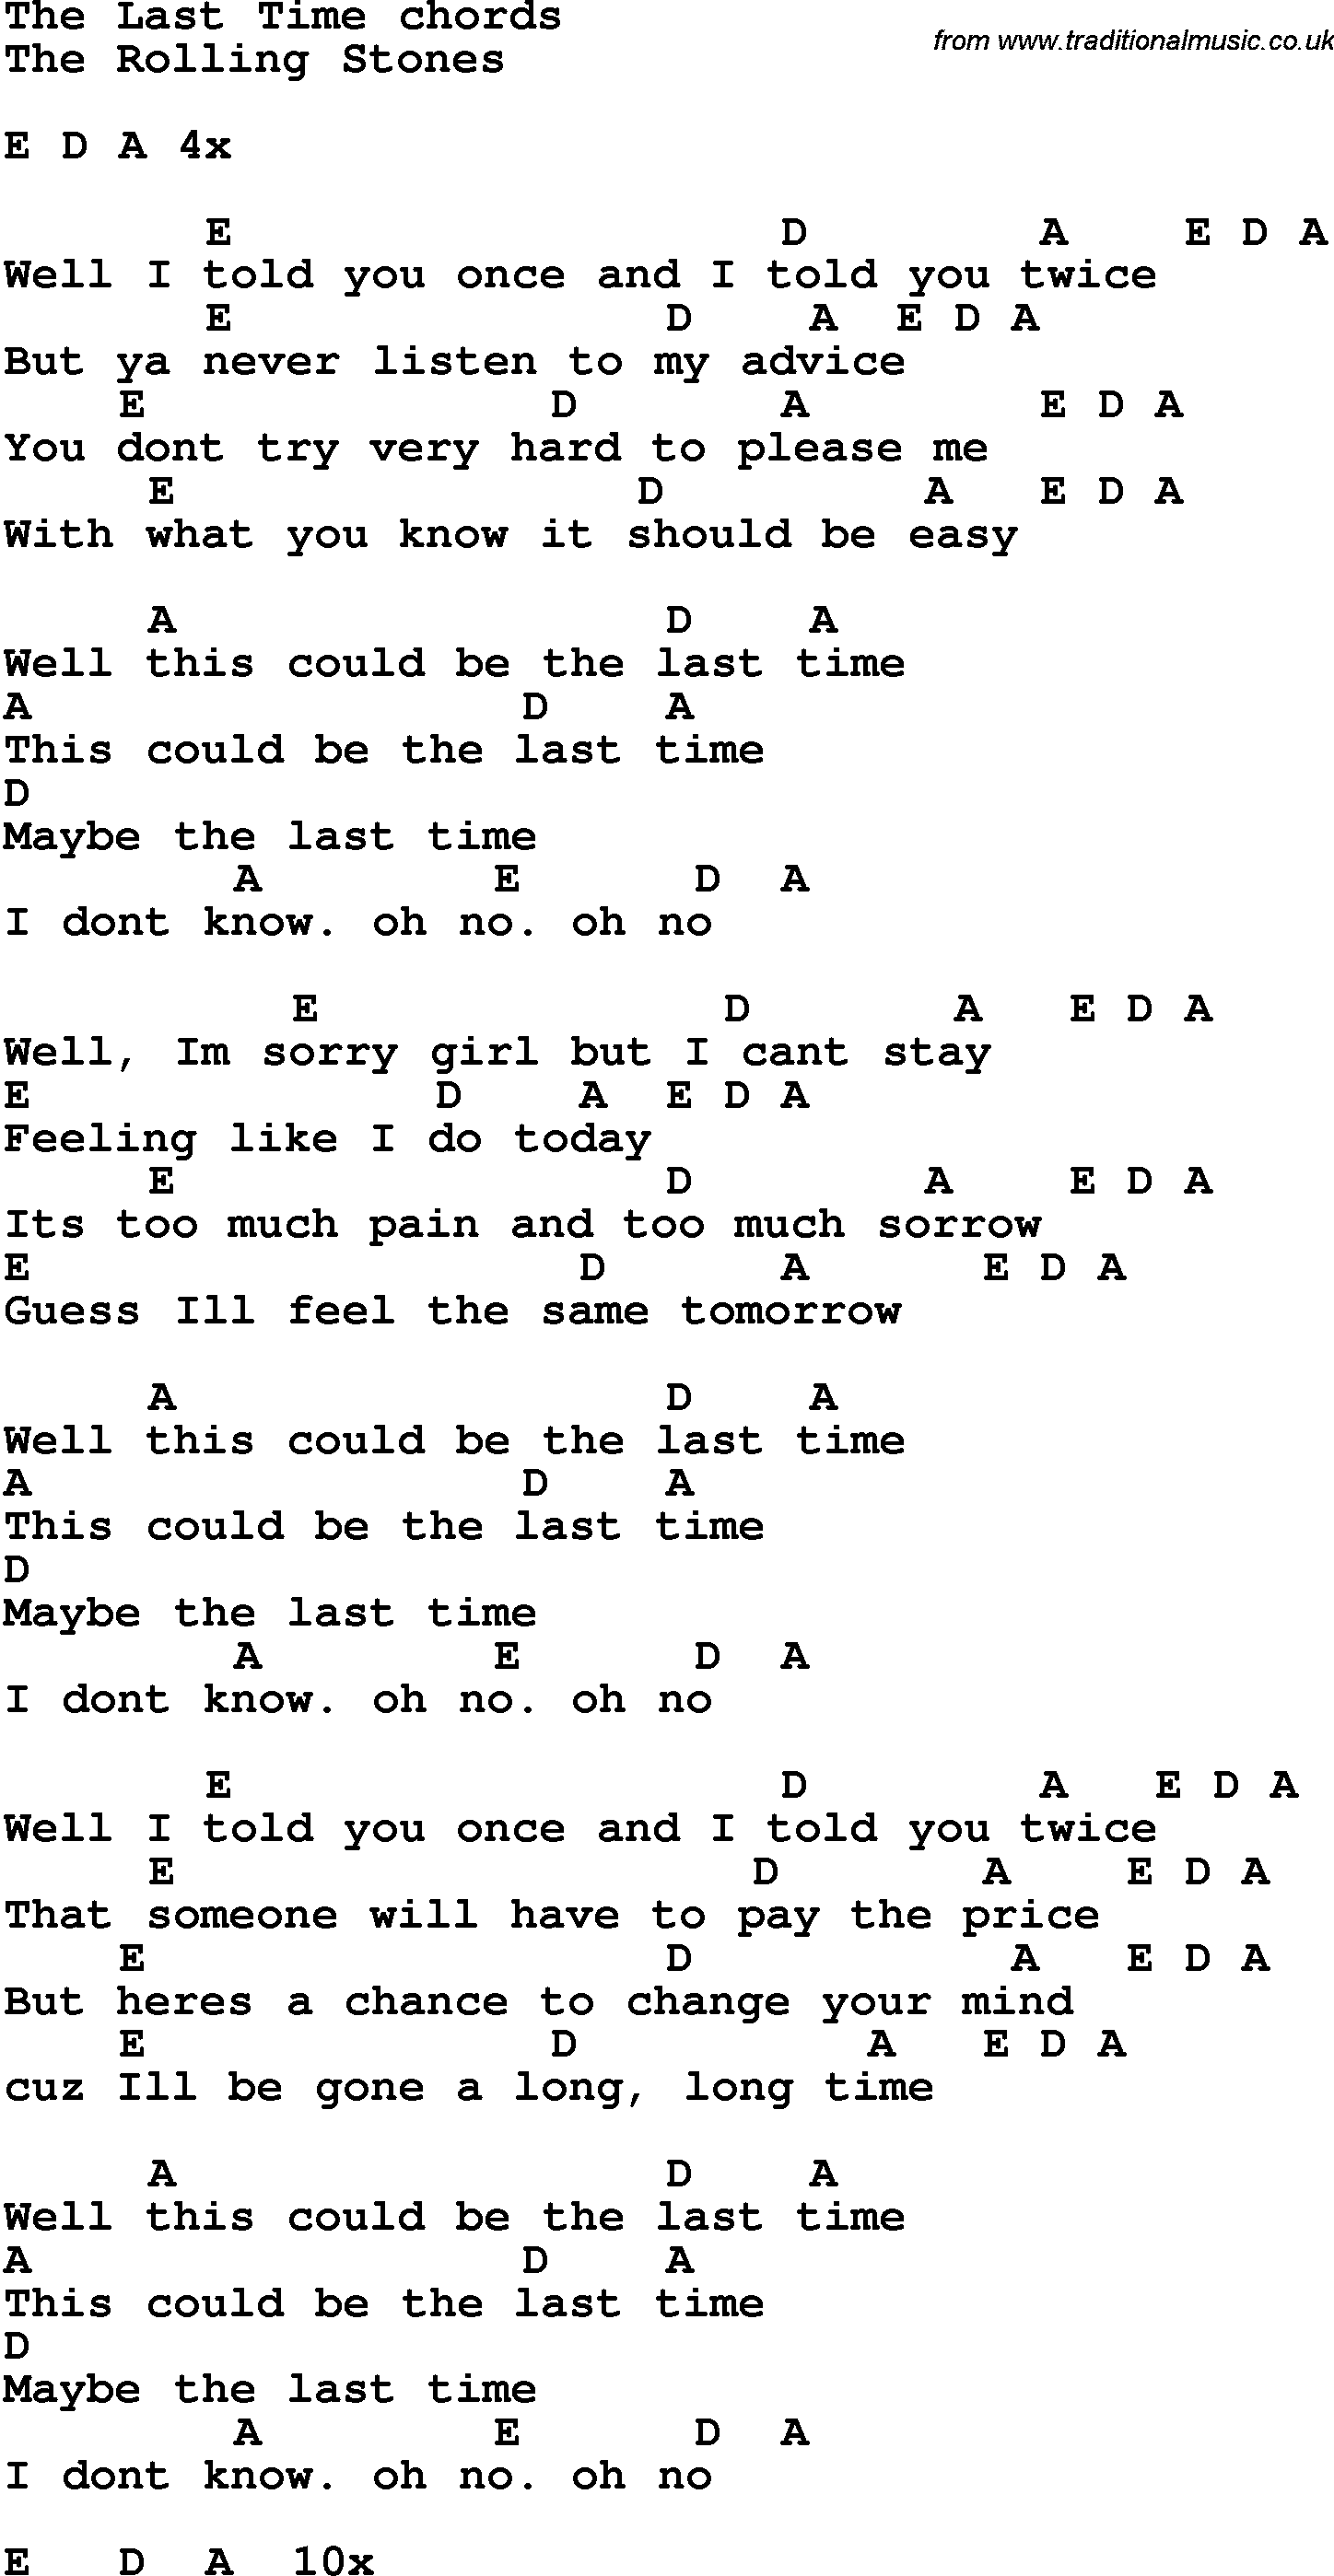 Song Lyrics with guitar chords for The Last Time - The Rolling Stones